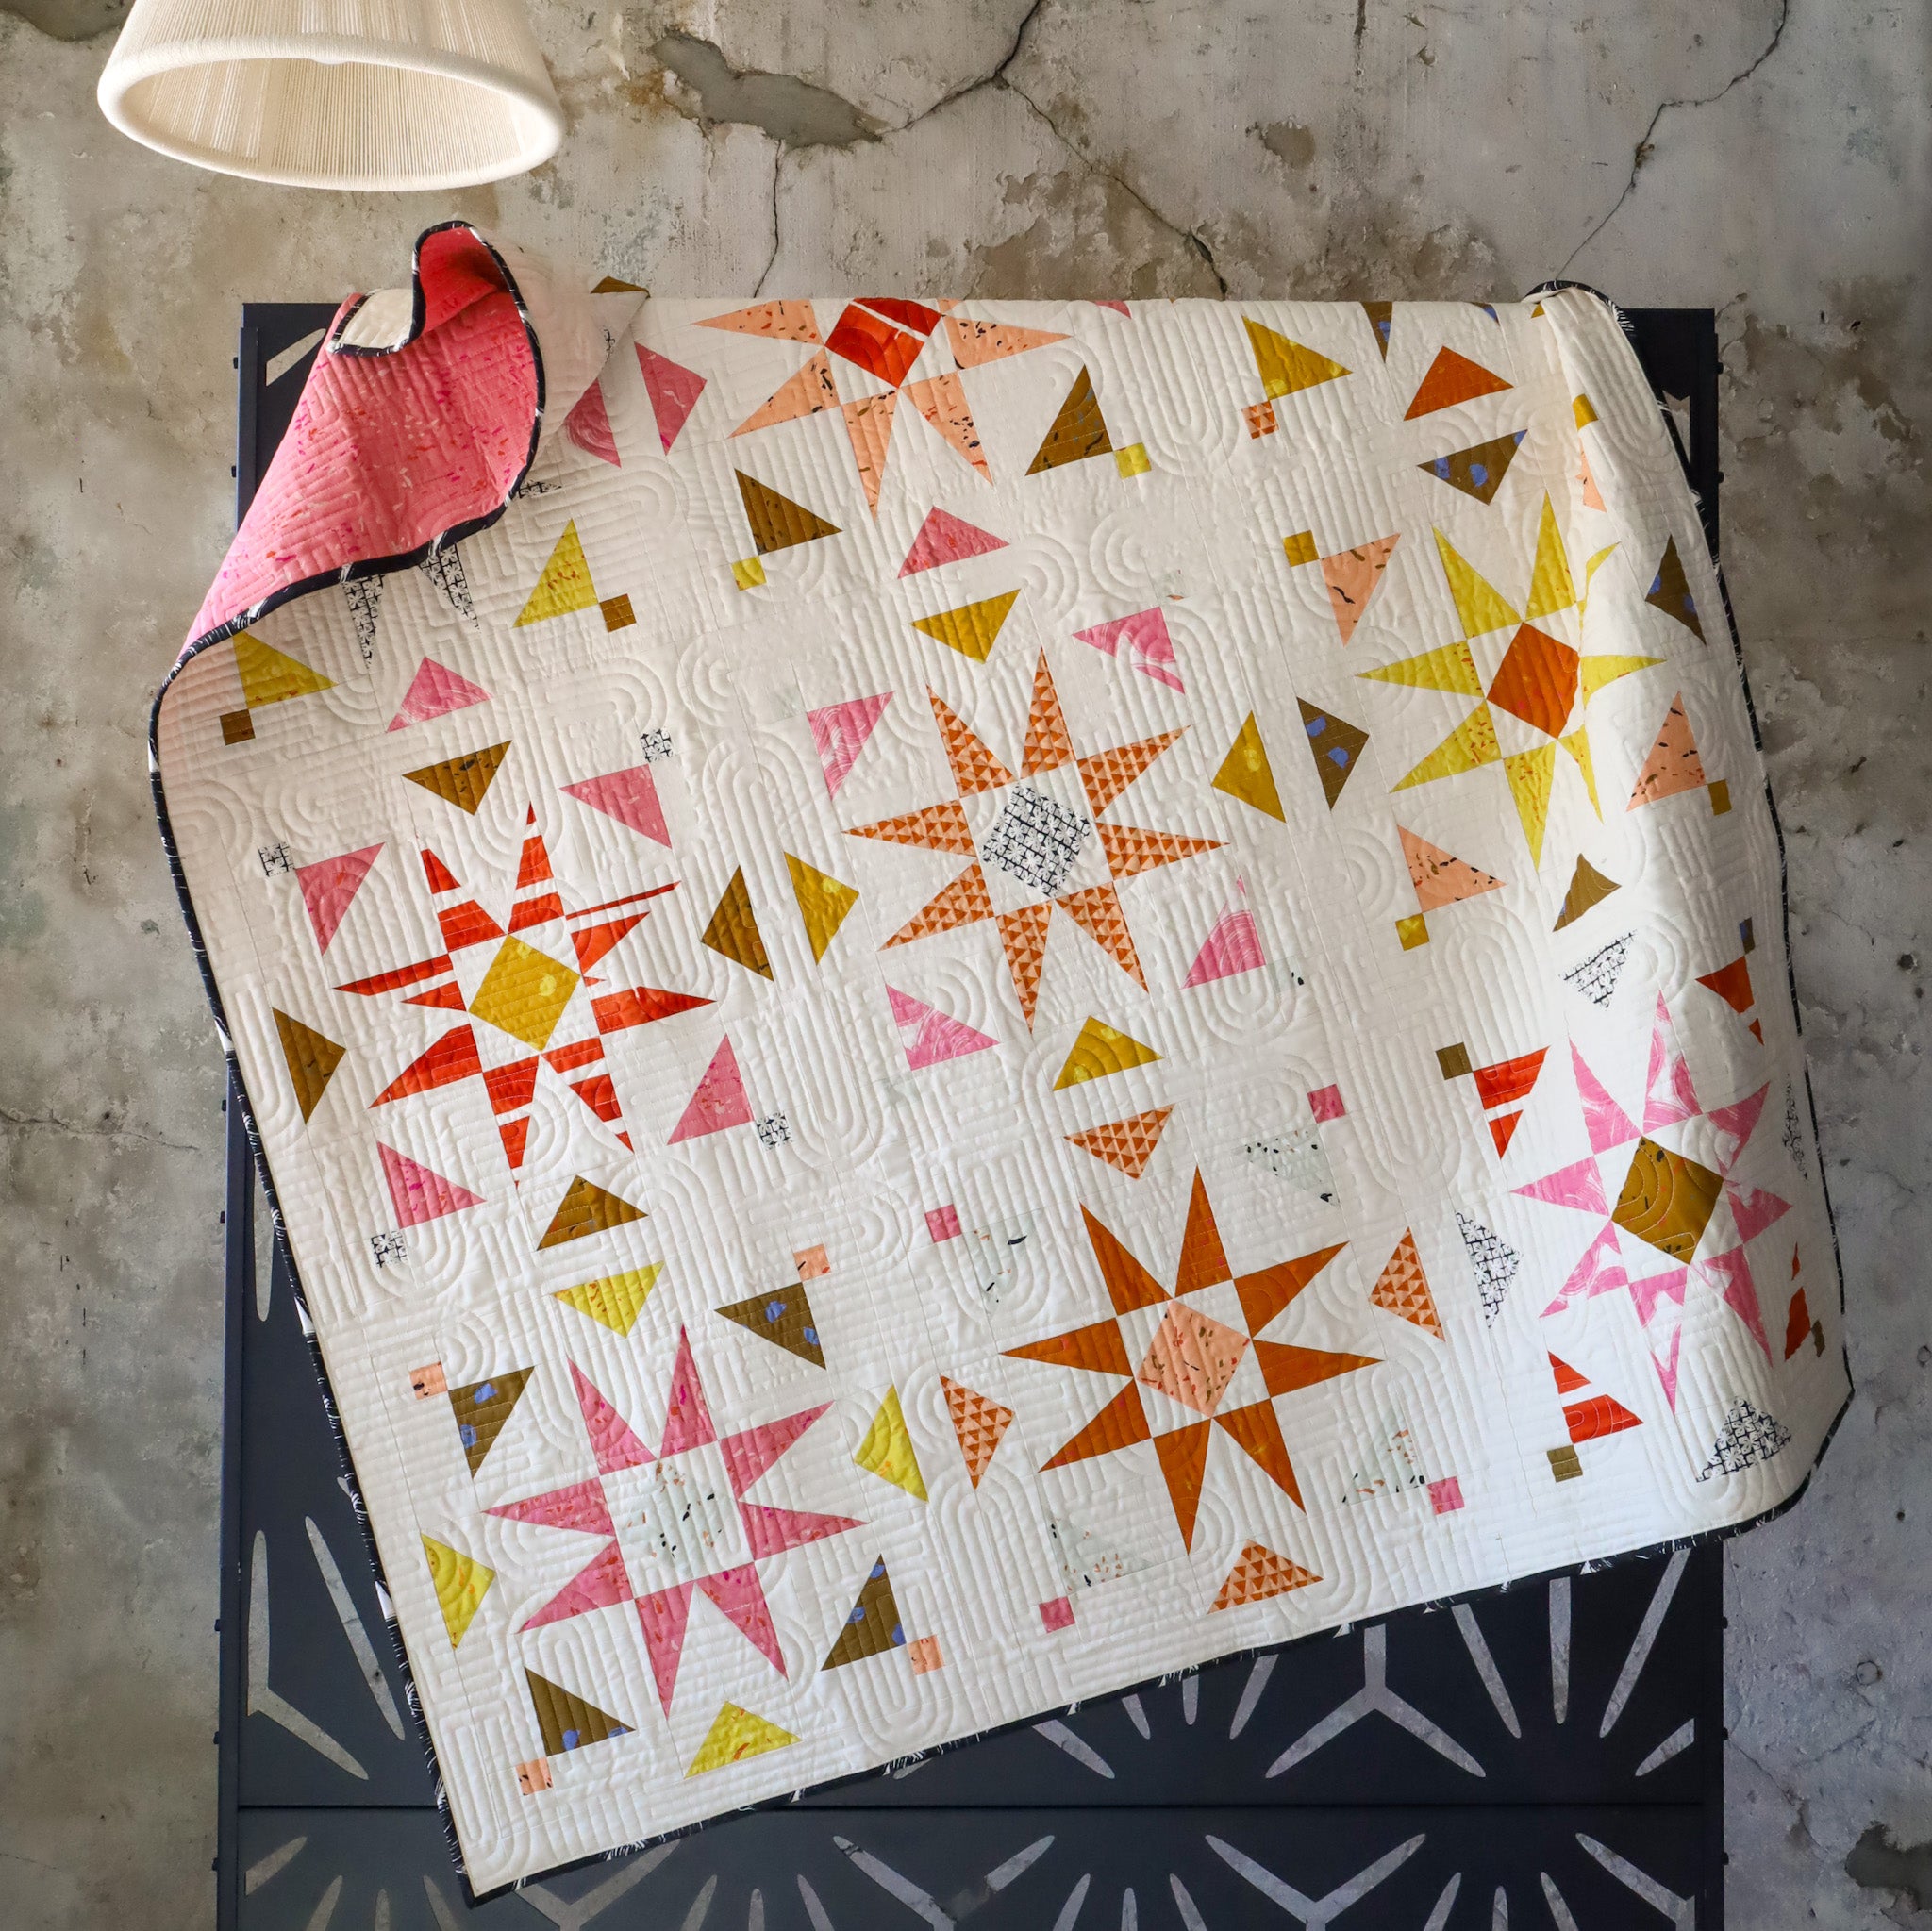 Pencil Me In Pouch from Sew Lux Fabric – Off the Rails Quilting